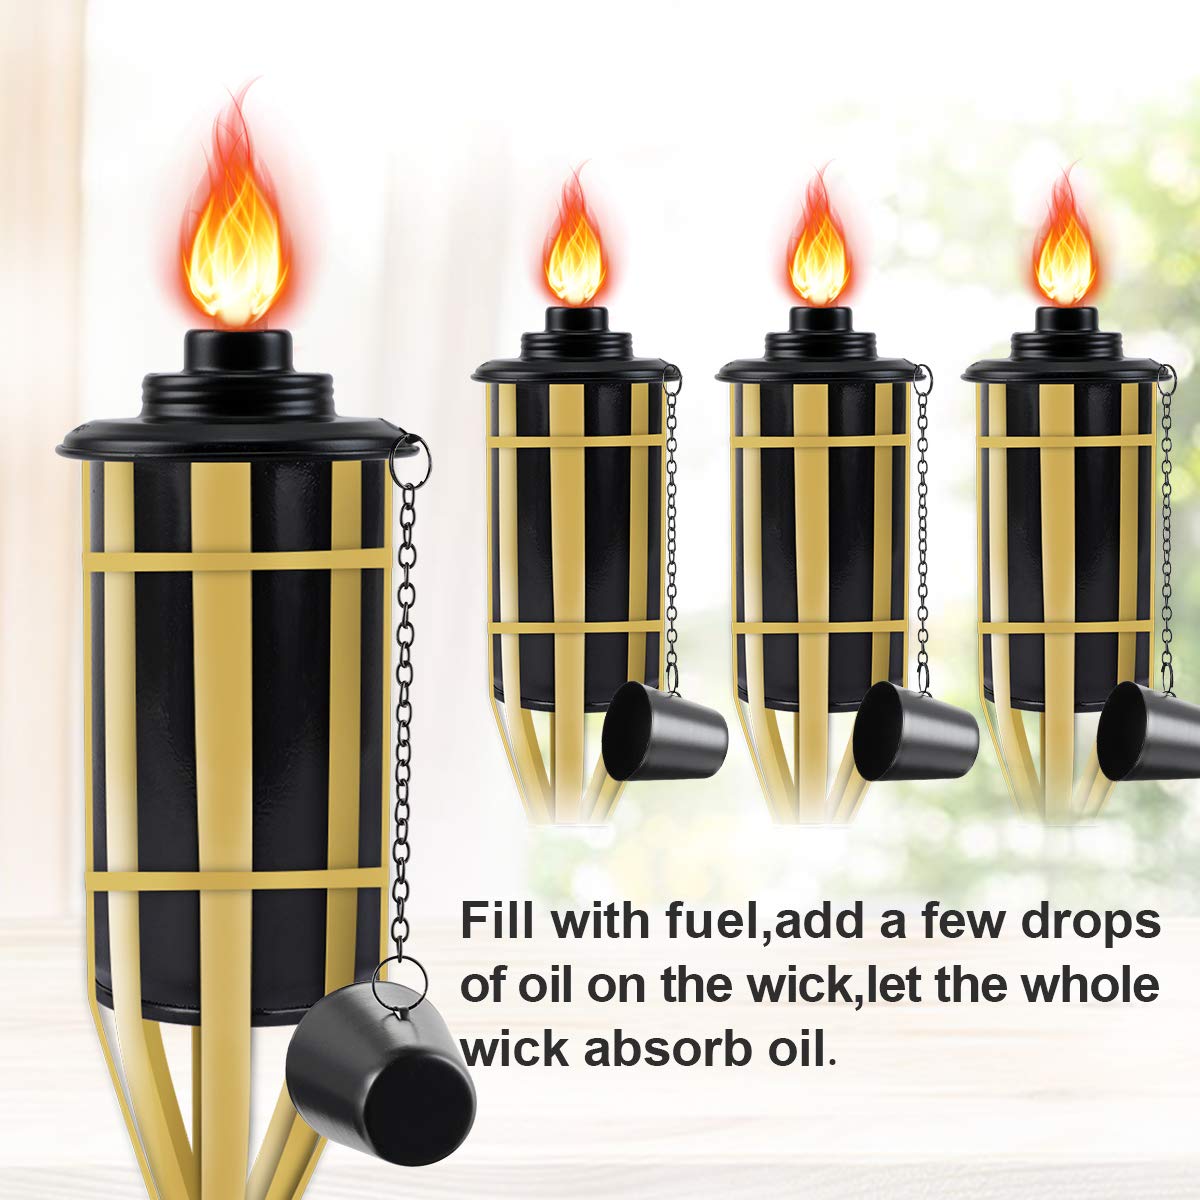 LANMU Torch Canisters 16 oz, Bamboo Torch Refill Canister, Replacement Torch Fuel Canisters with Wicks and Covers, Outdoor Patio Torch for Luau Party, DIY Garden Torch Decor (4 Pack)